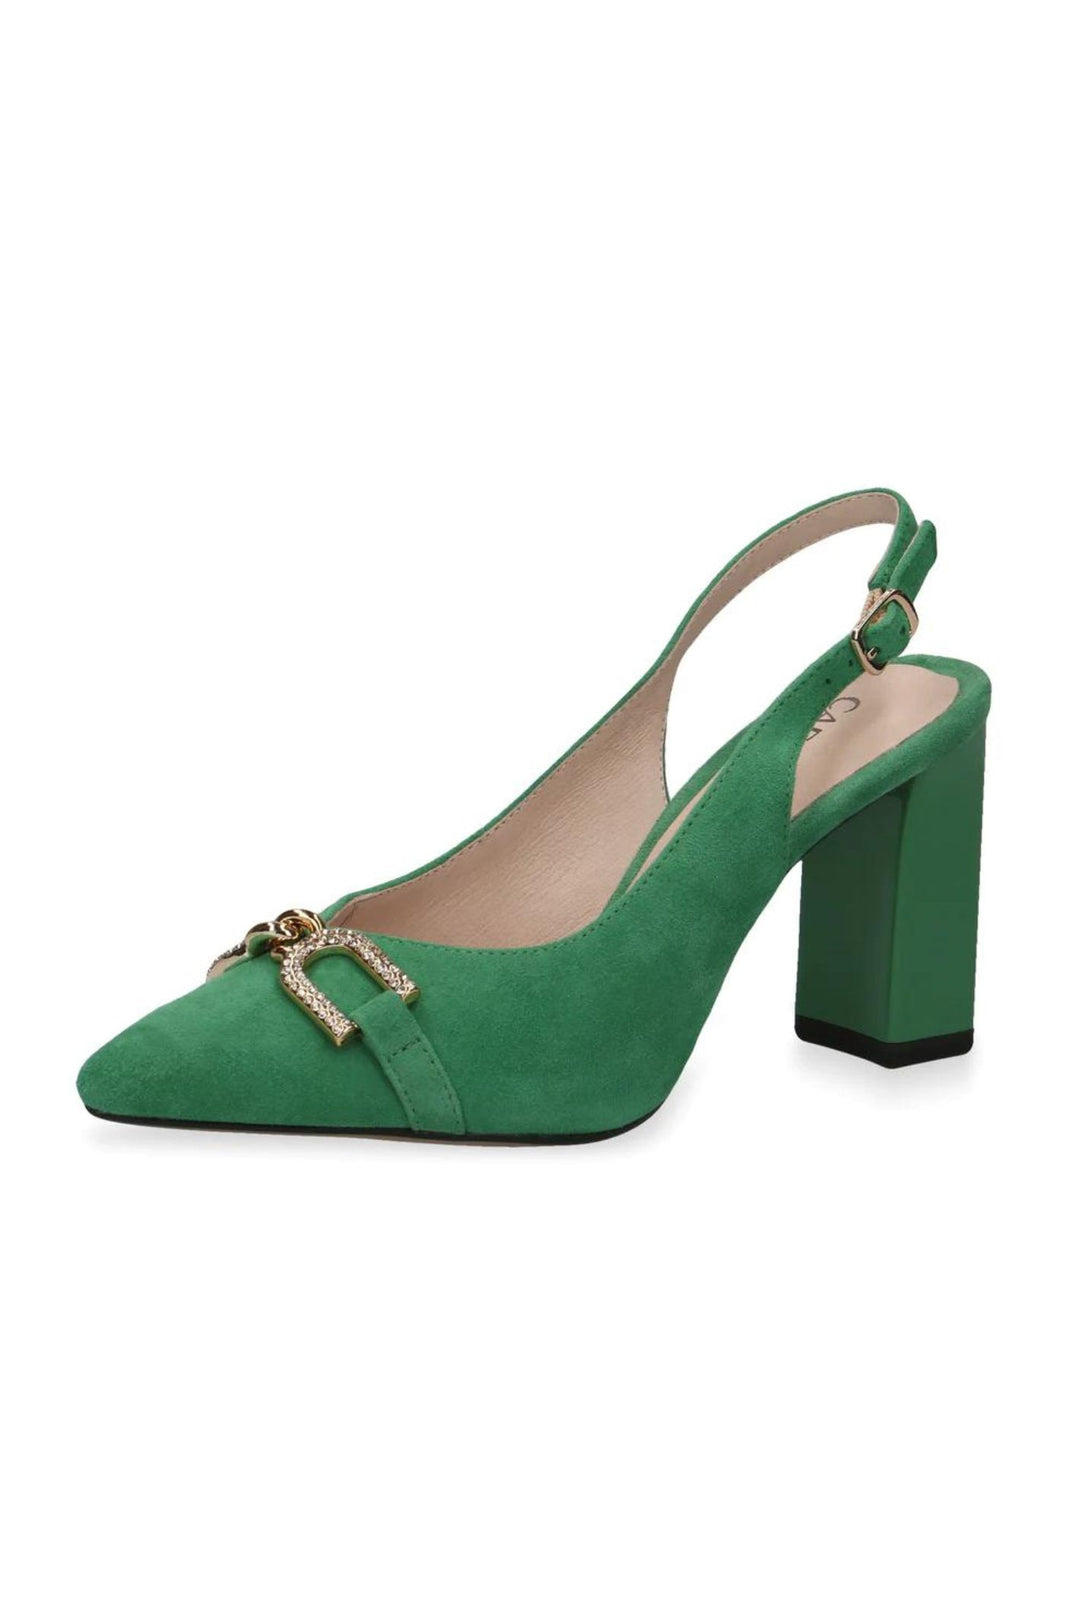 Caprice 29600 Green Suede Leather Slingback Shoe